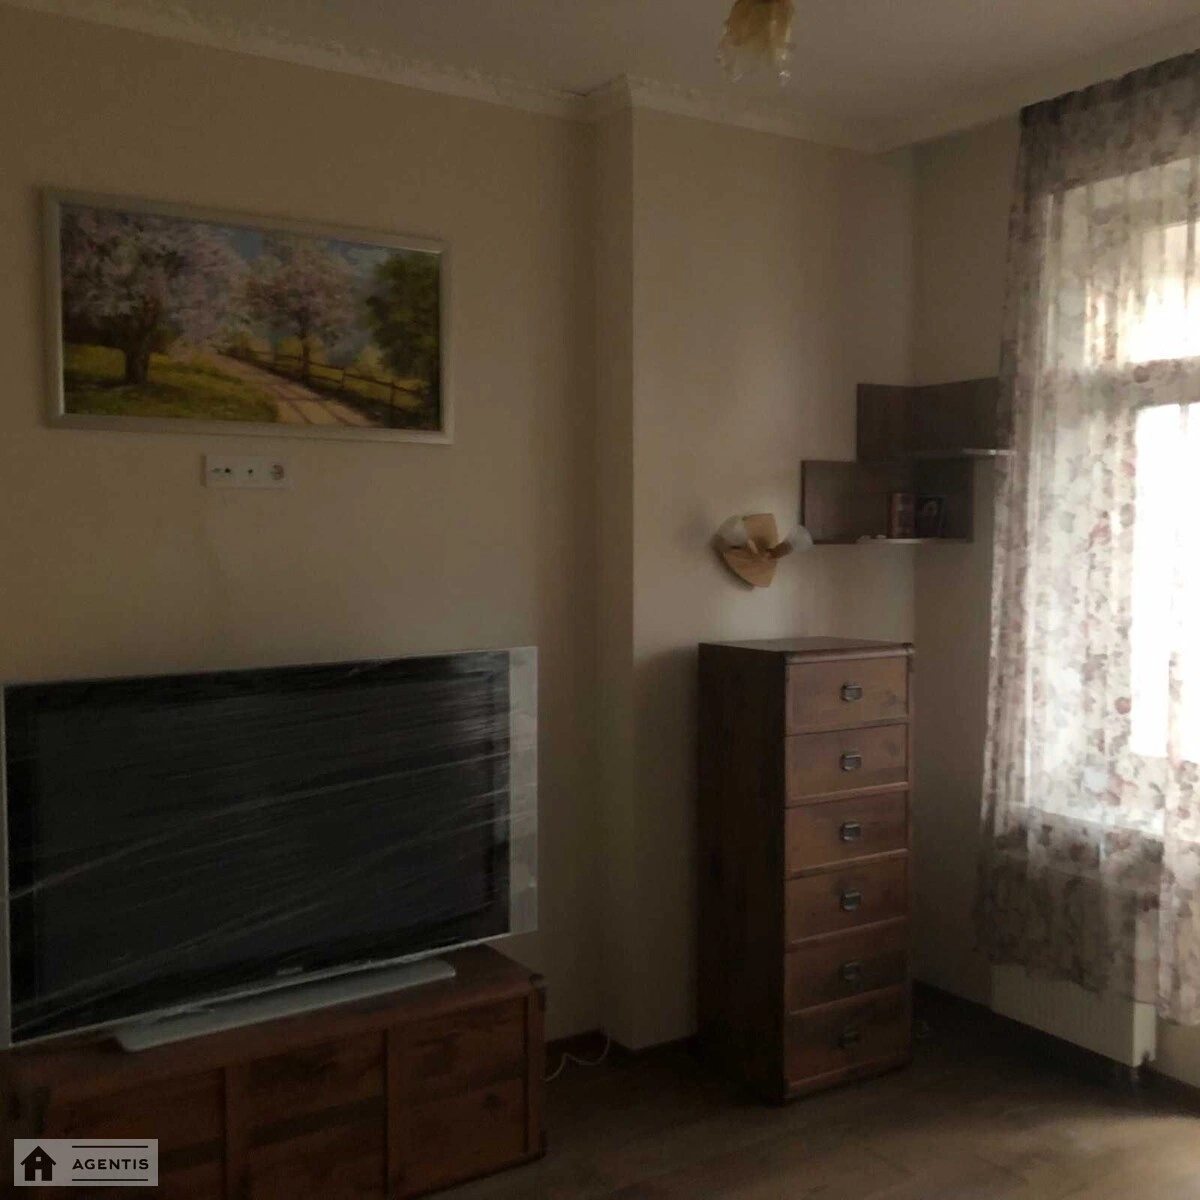 Apartment for rent. 3 rooms, 90 m², 5th floor/17 floors. Shevchenkivskyy rayon, Kyiv. 